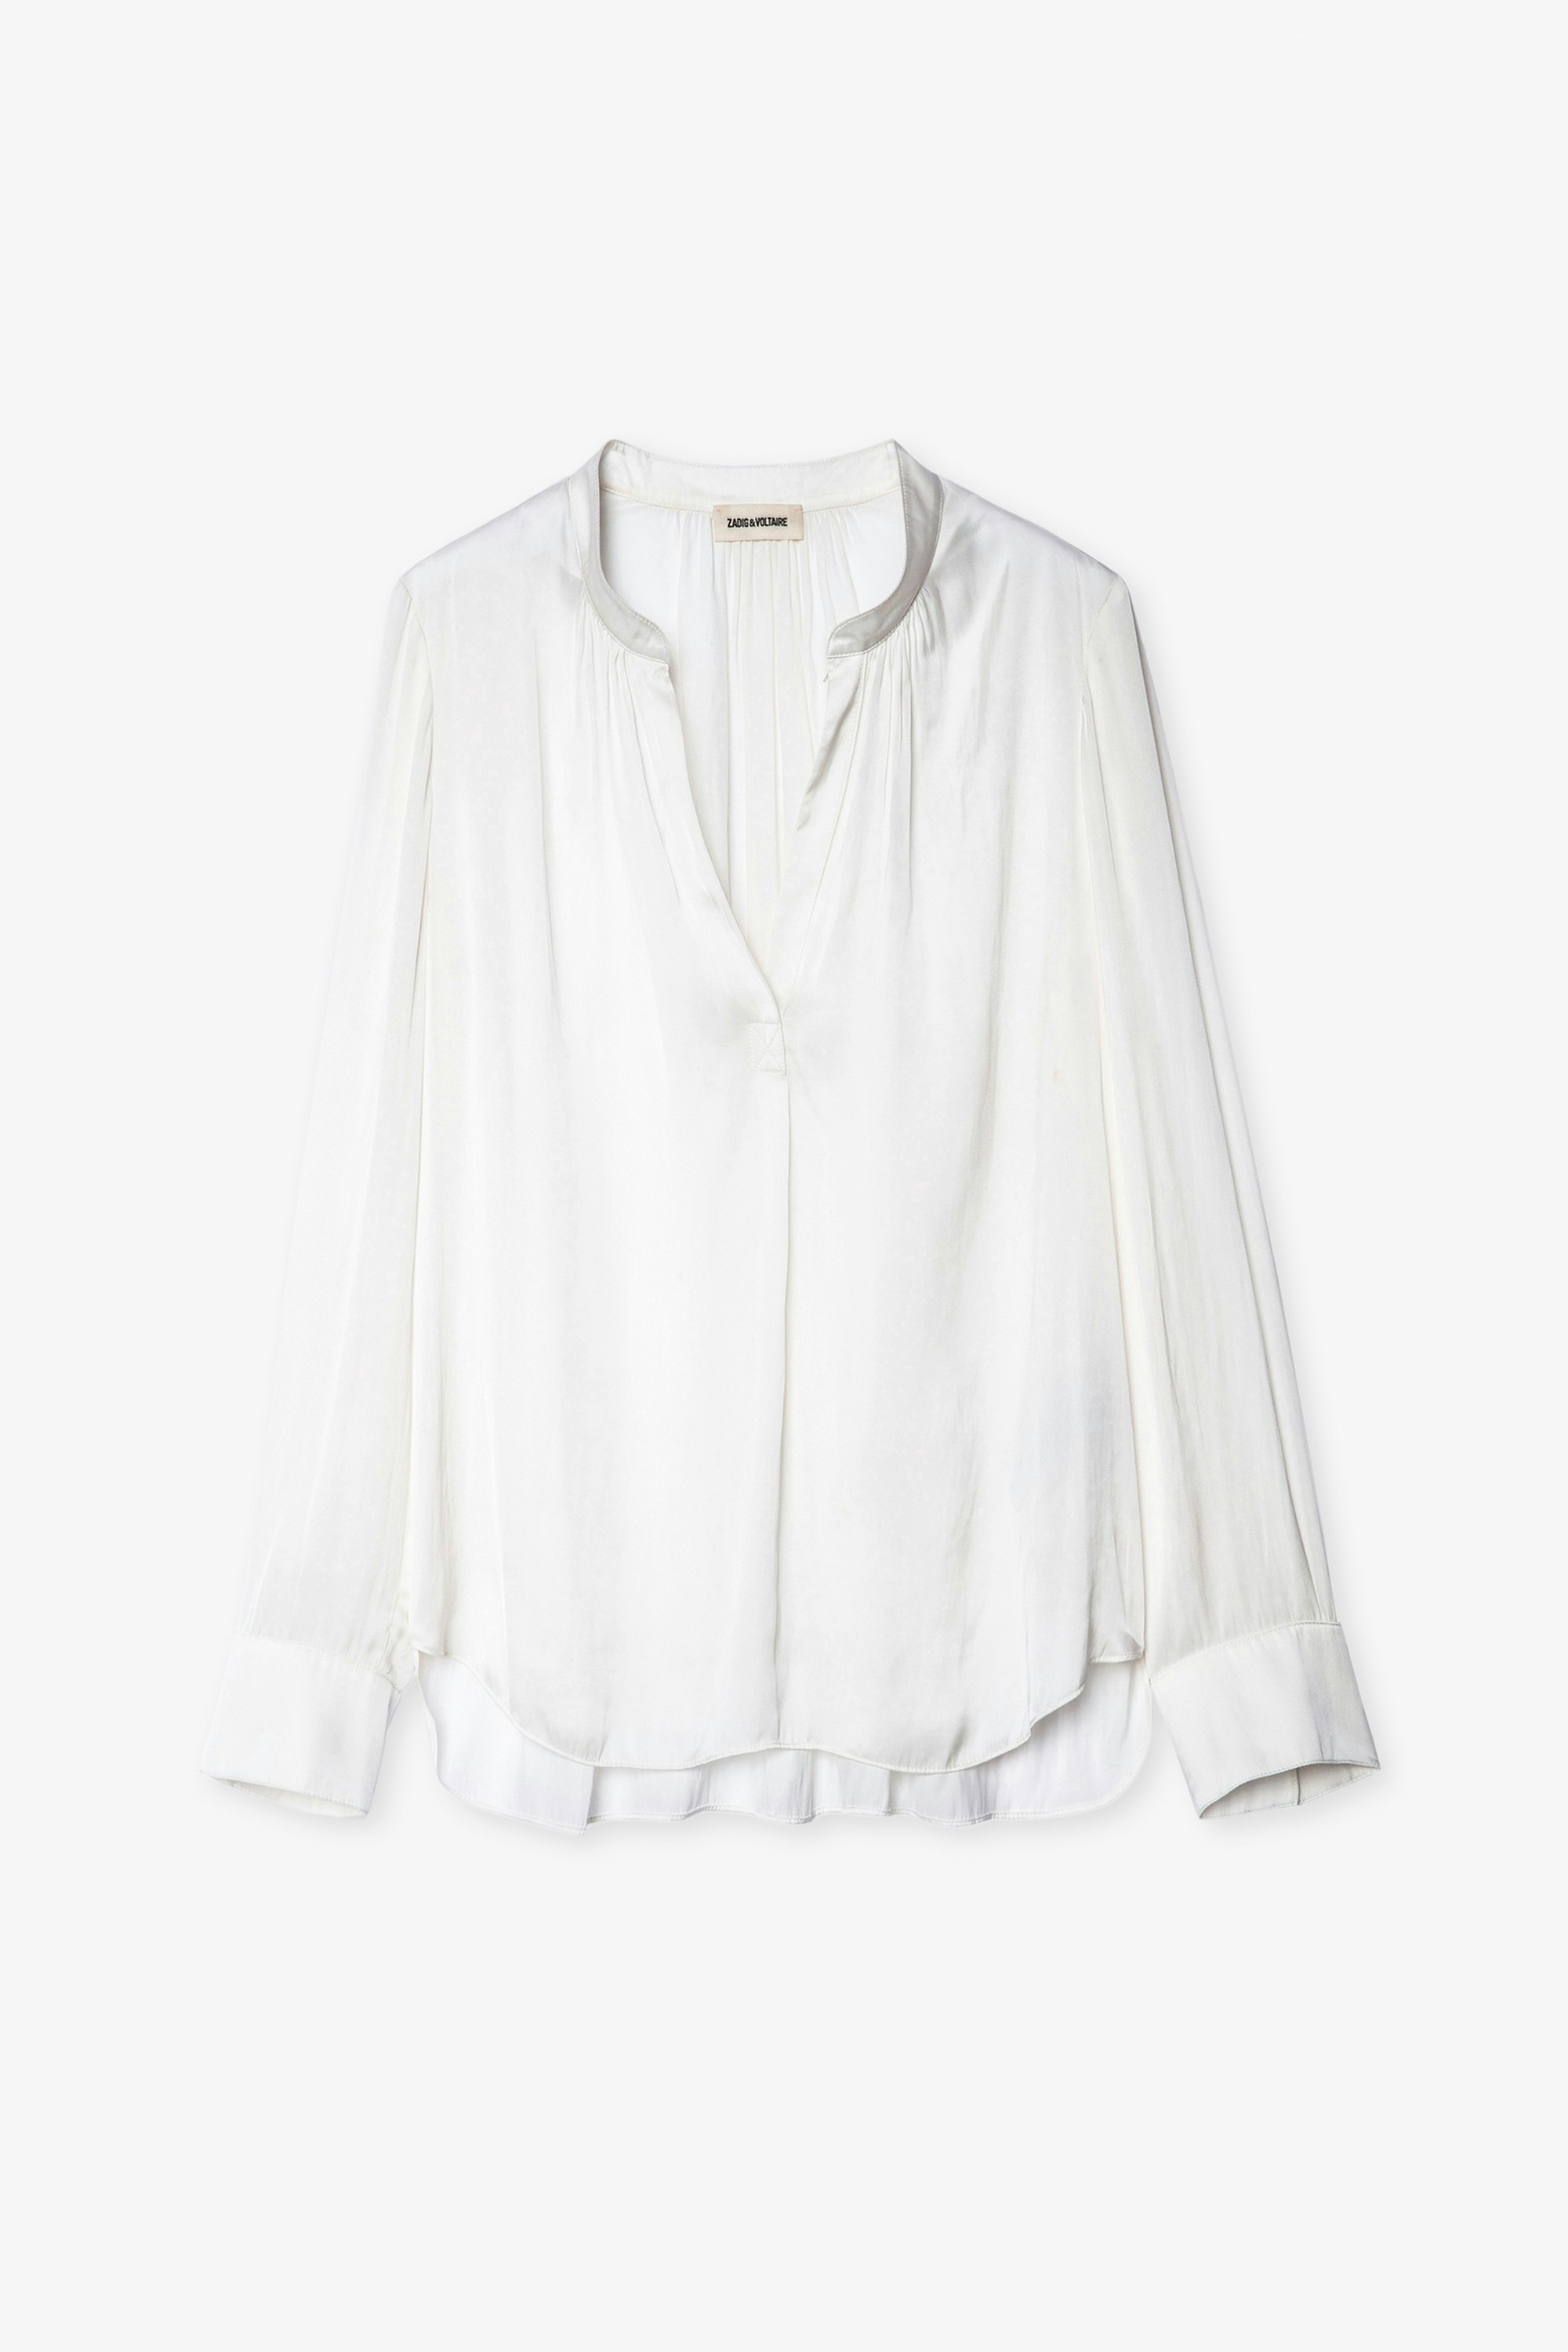 Tink Satin Tunic - Zadig&Voltaire women's white top.